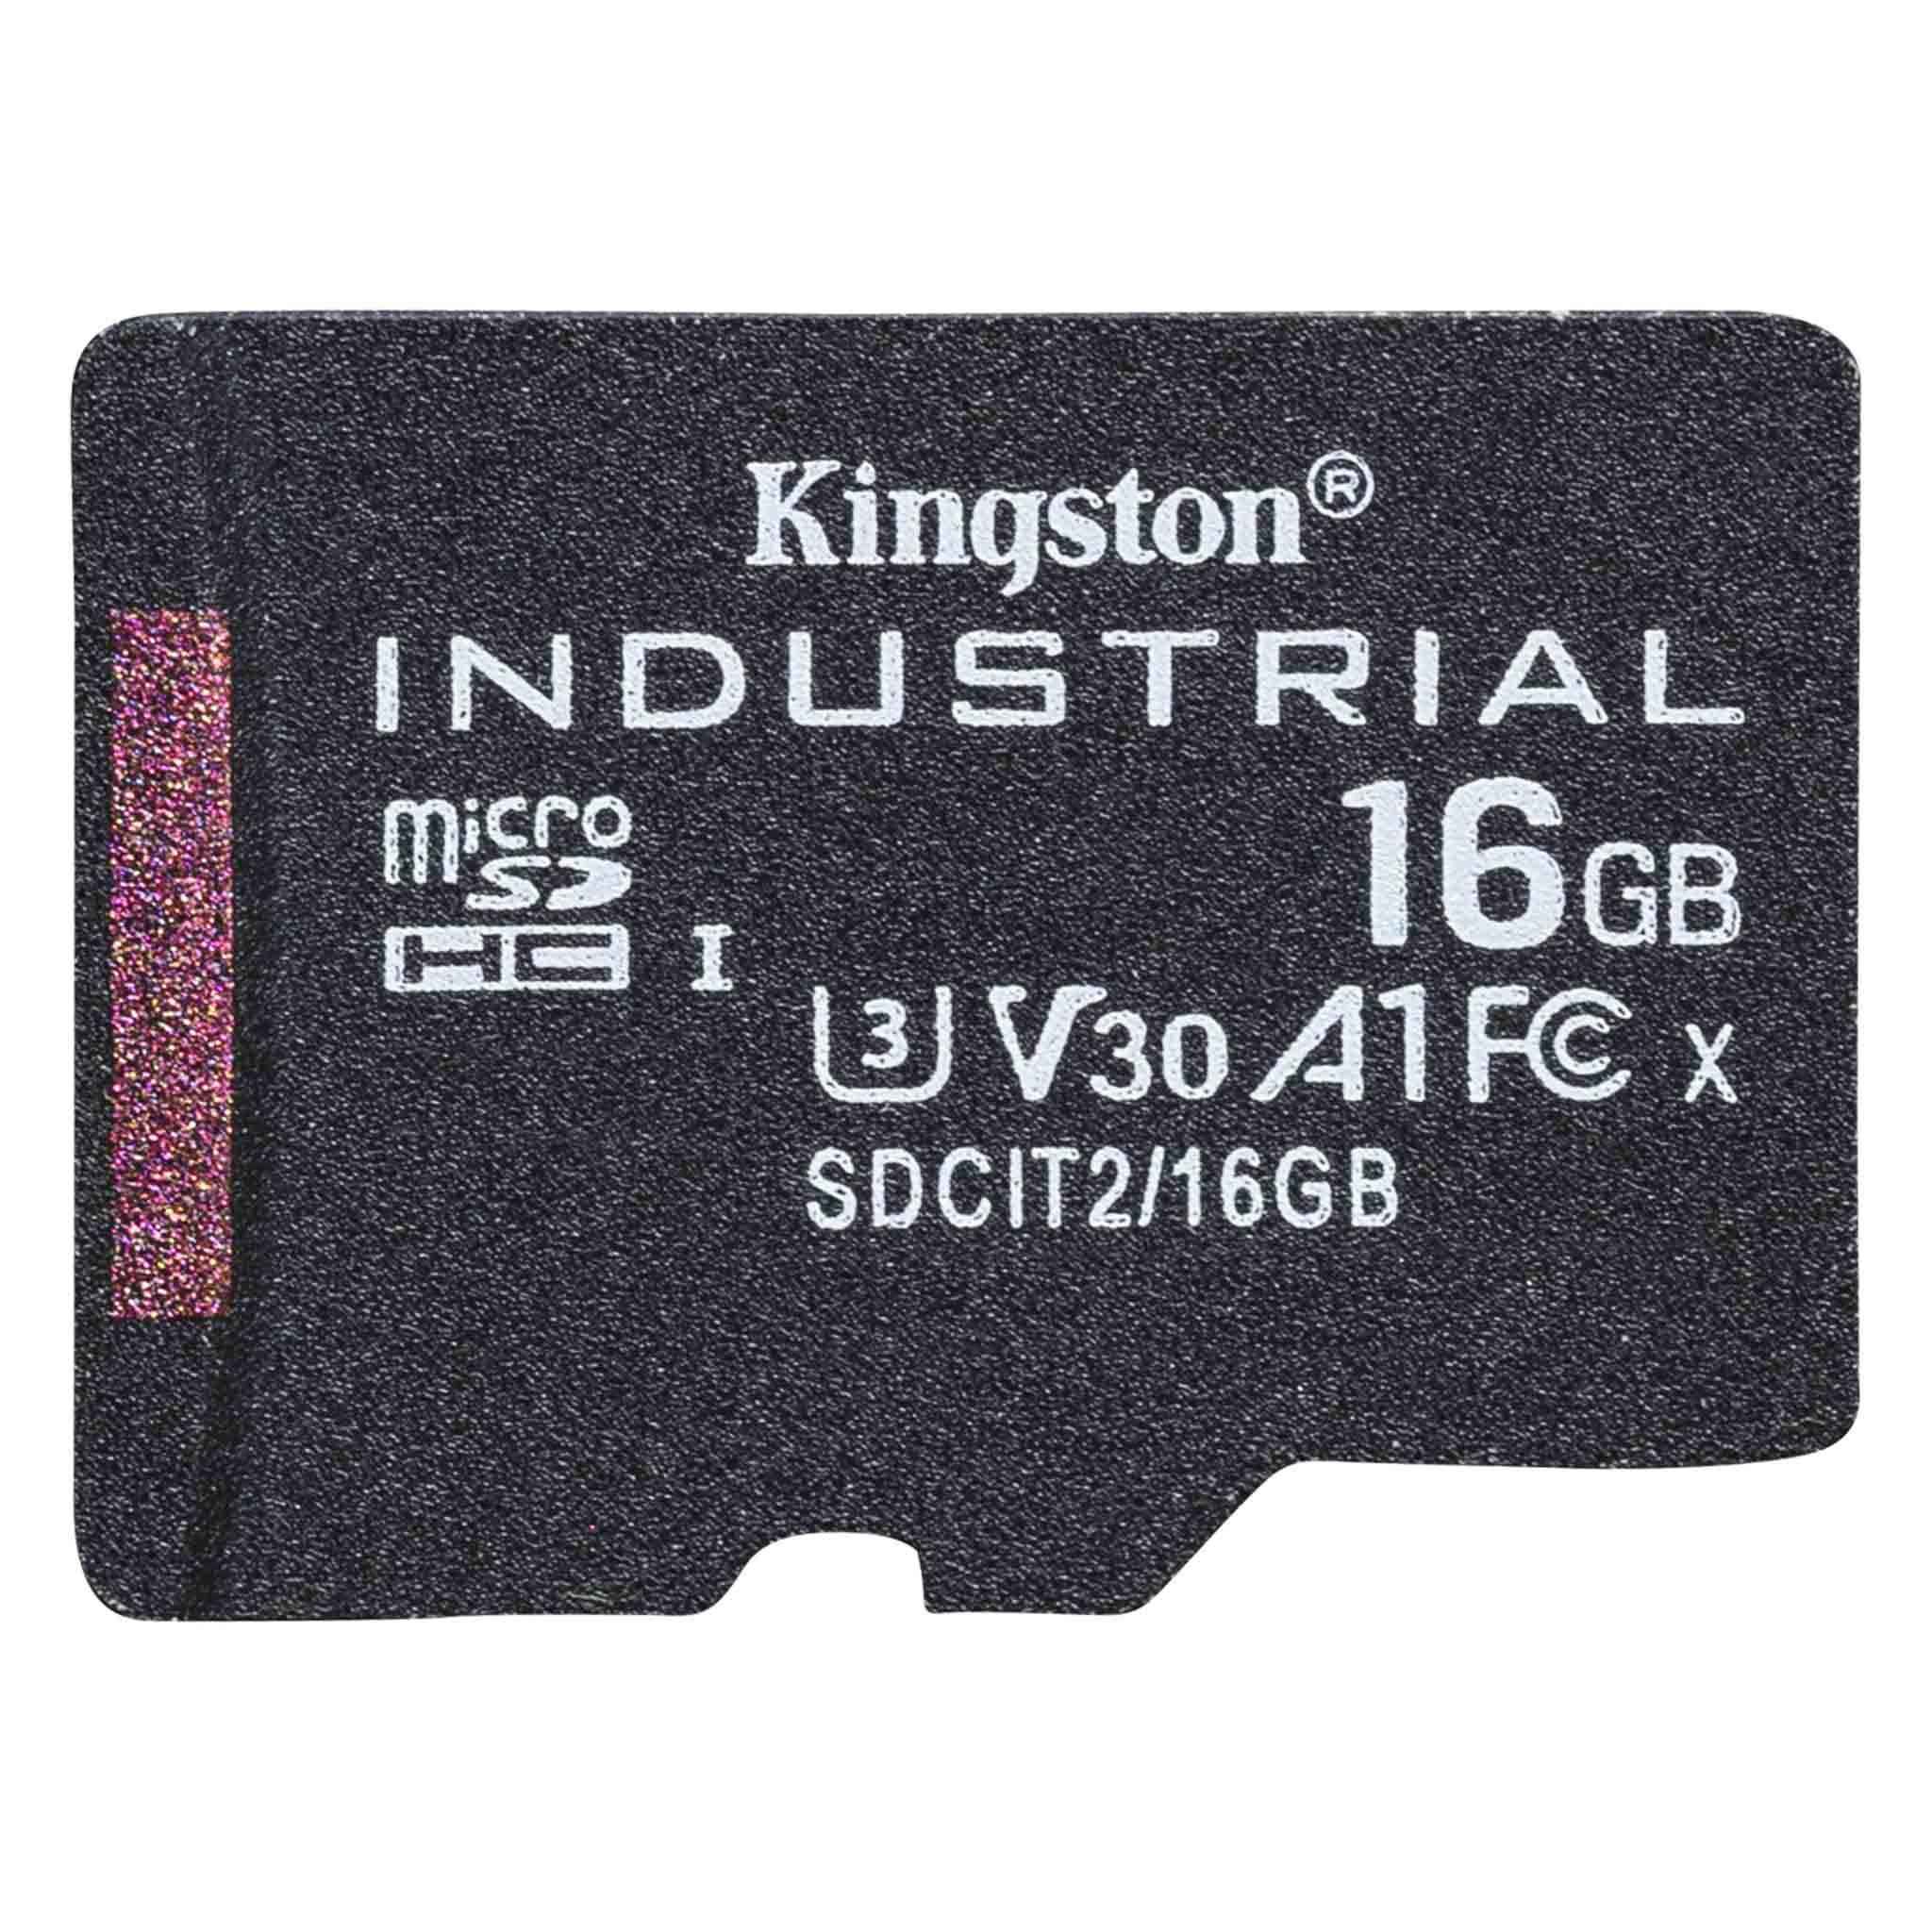 Kingston Industrial Grade 8GB Philips Xenium S307 MicroSDHC Card Verified by SanFlash. 90MBs Works for Kingston 